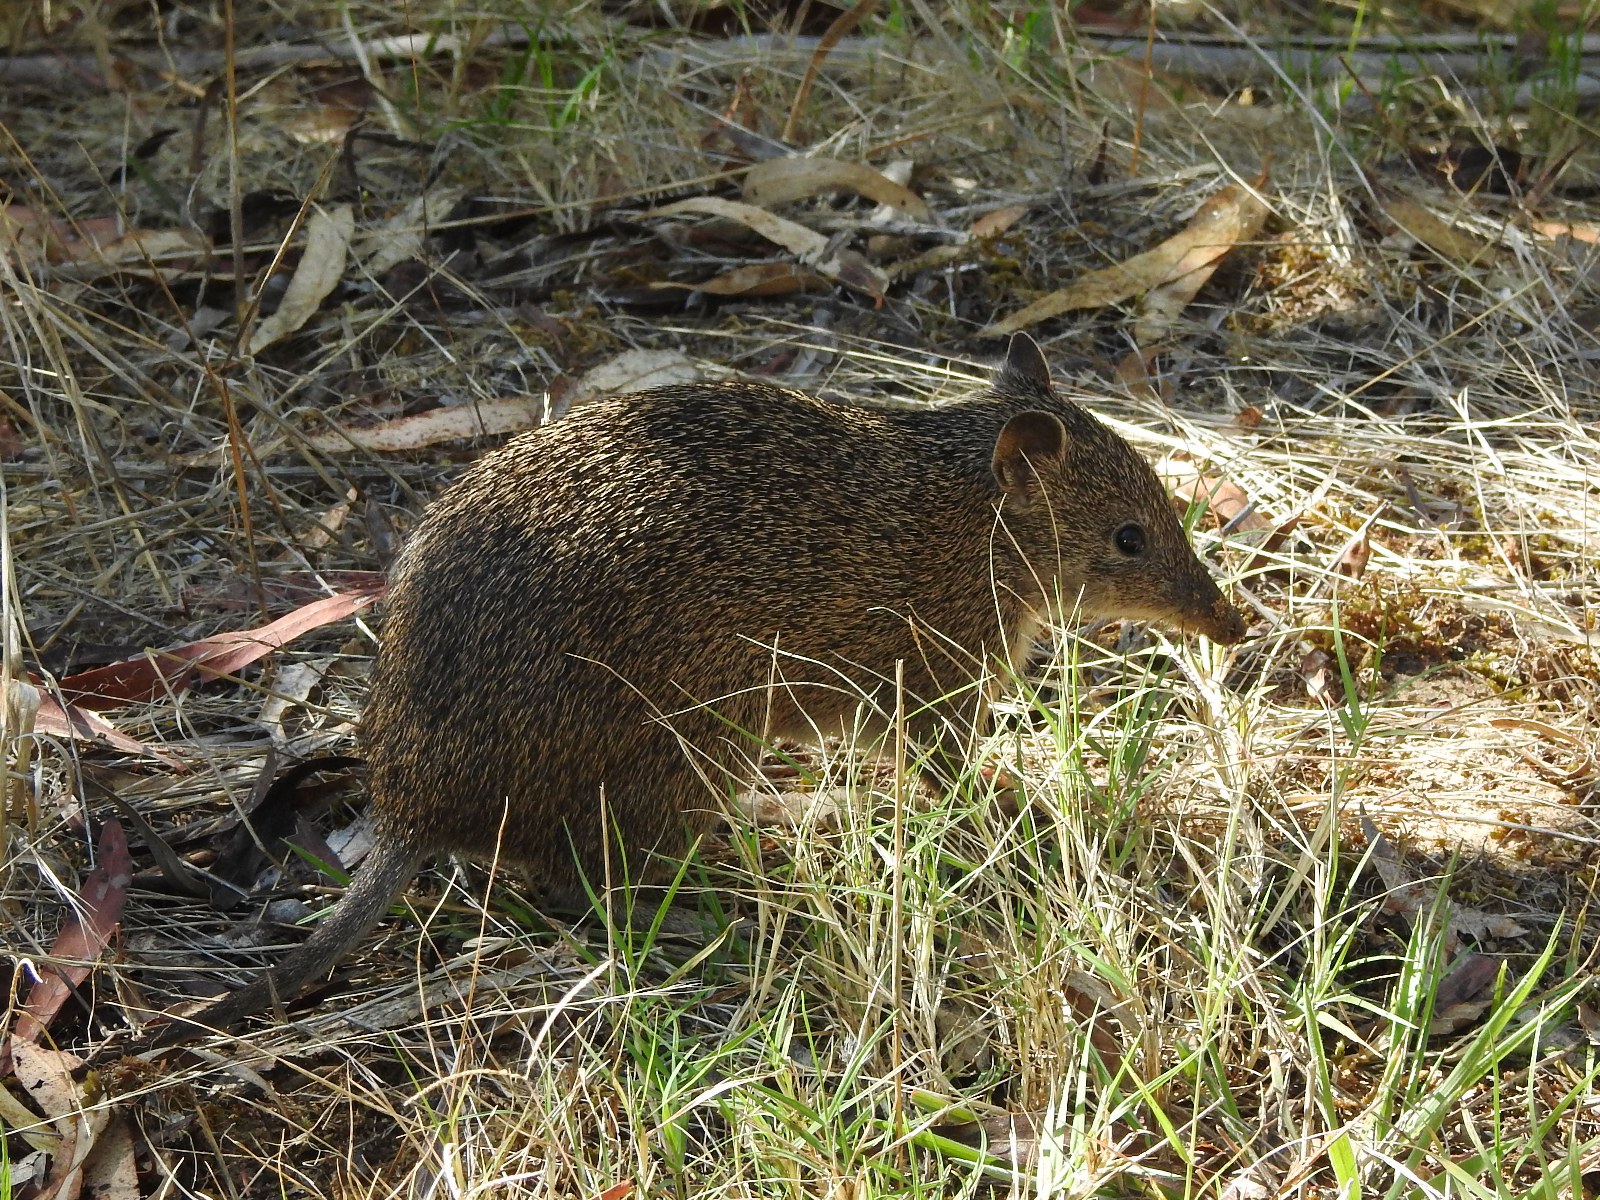 Southern Brown Bandicoot, Isoodon obesulus obesulus endangered species of the Adelaide Hills, bandicoot superhighway